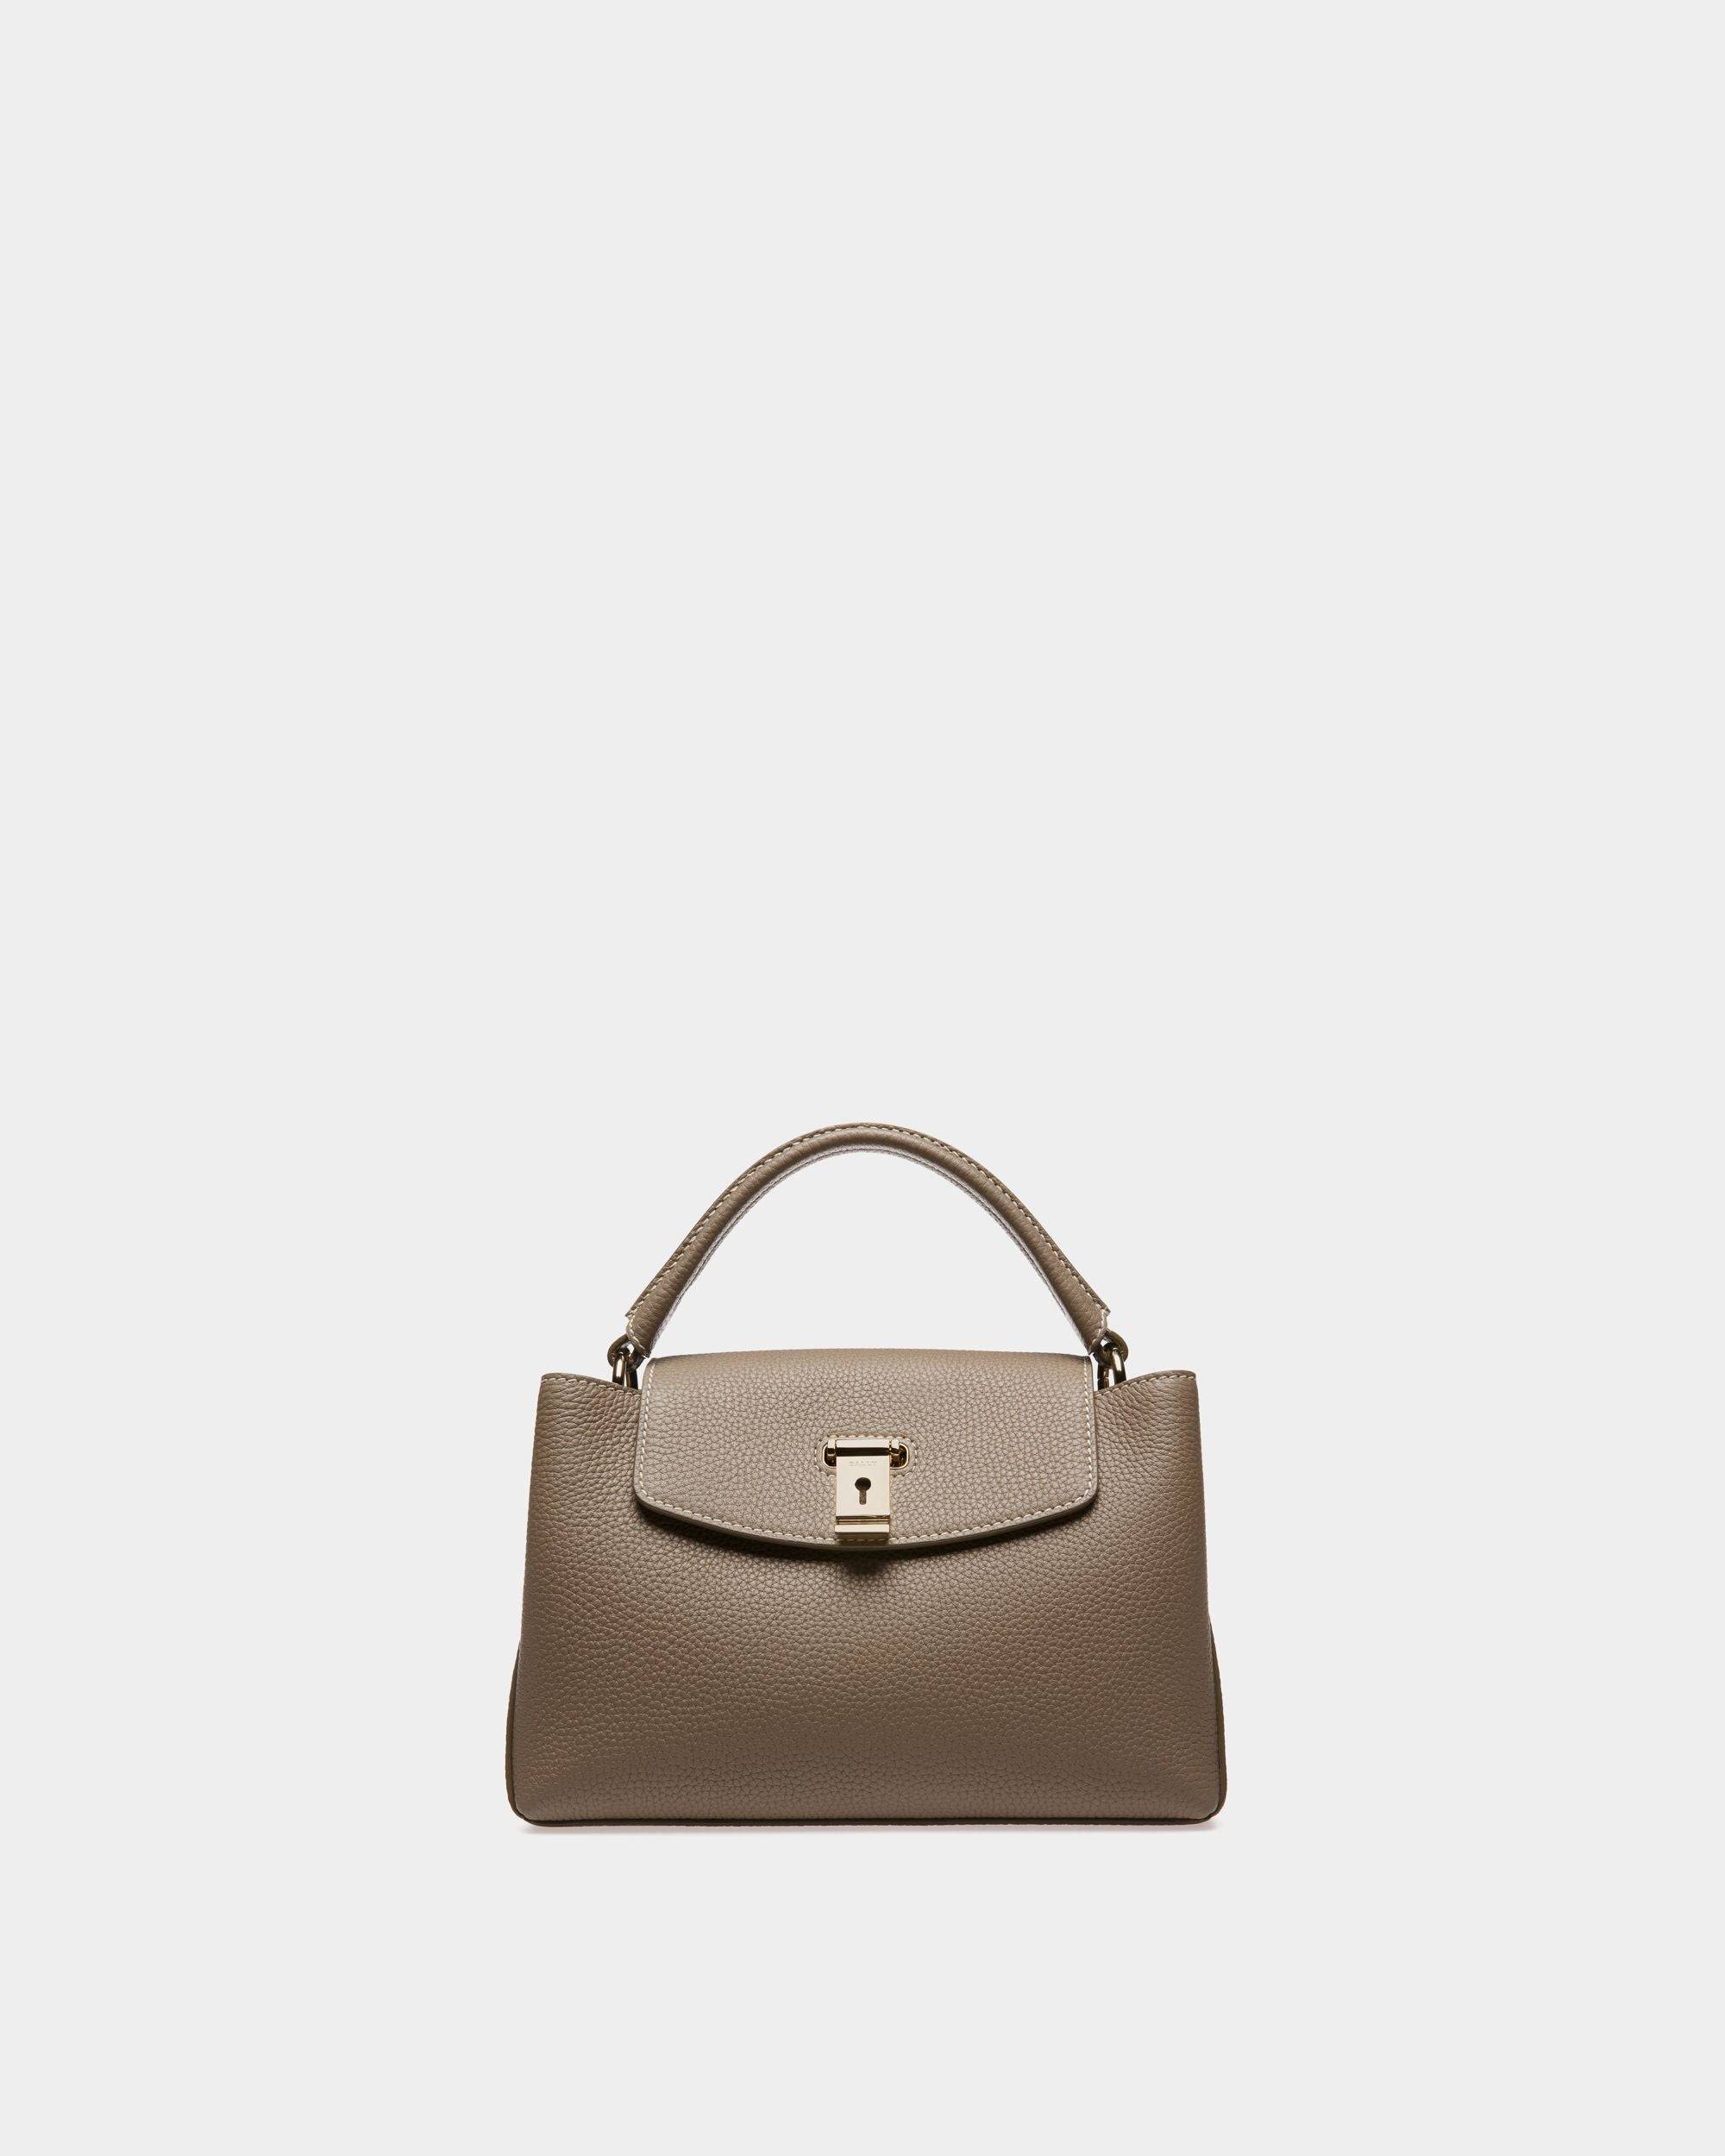 Women's Designer Bags: Shoulder Bags, Clutches & Totes | Bally